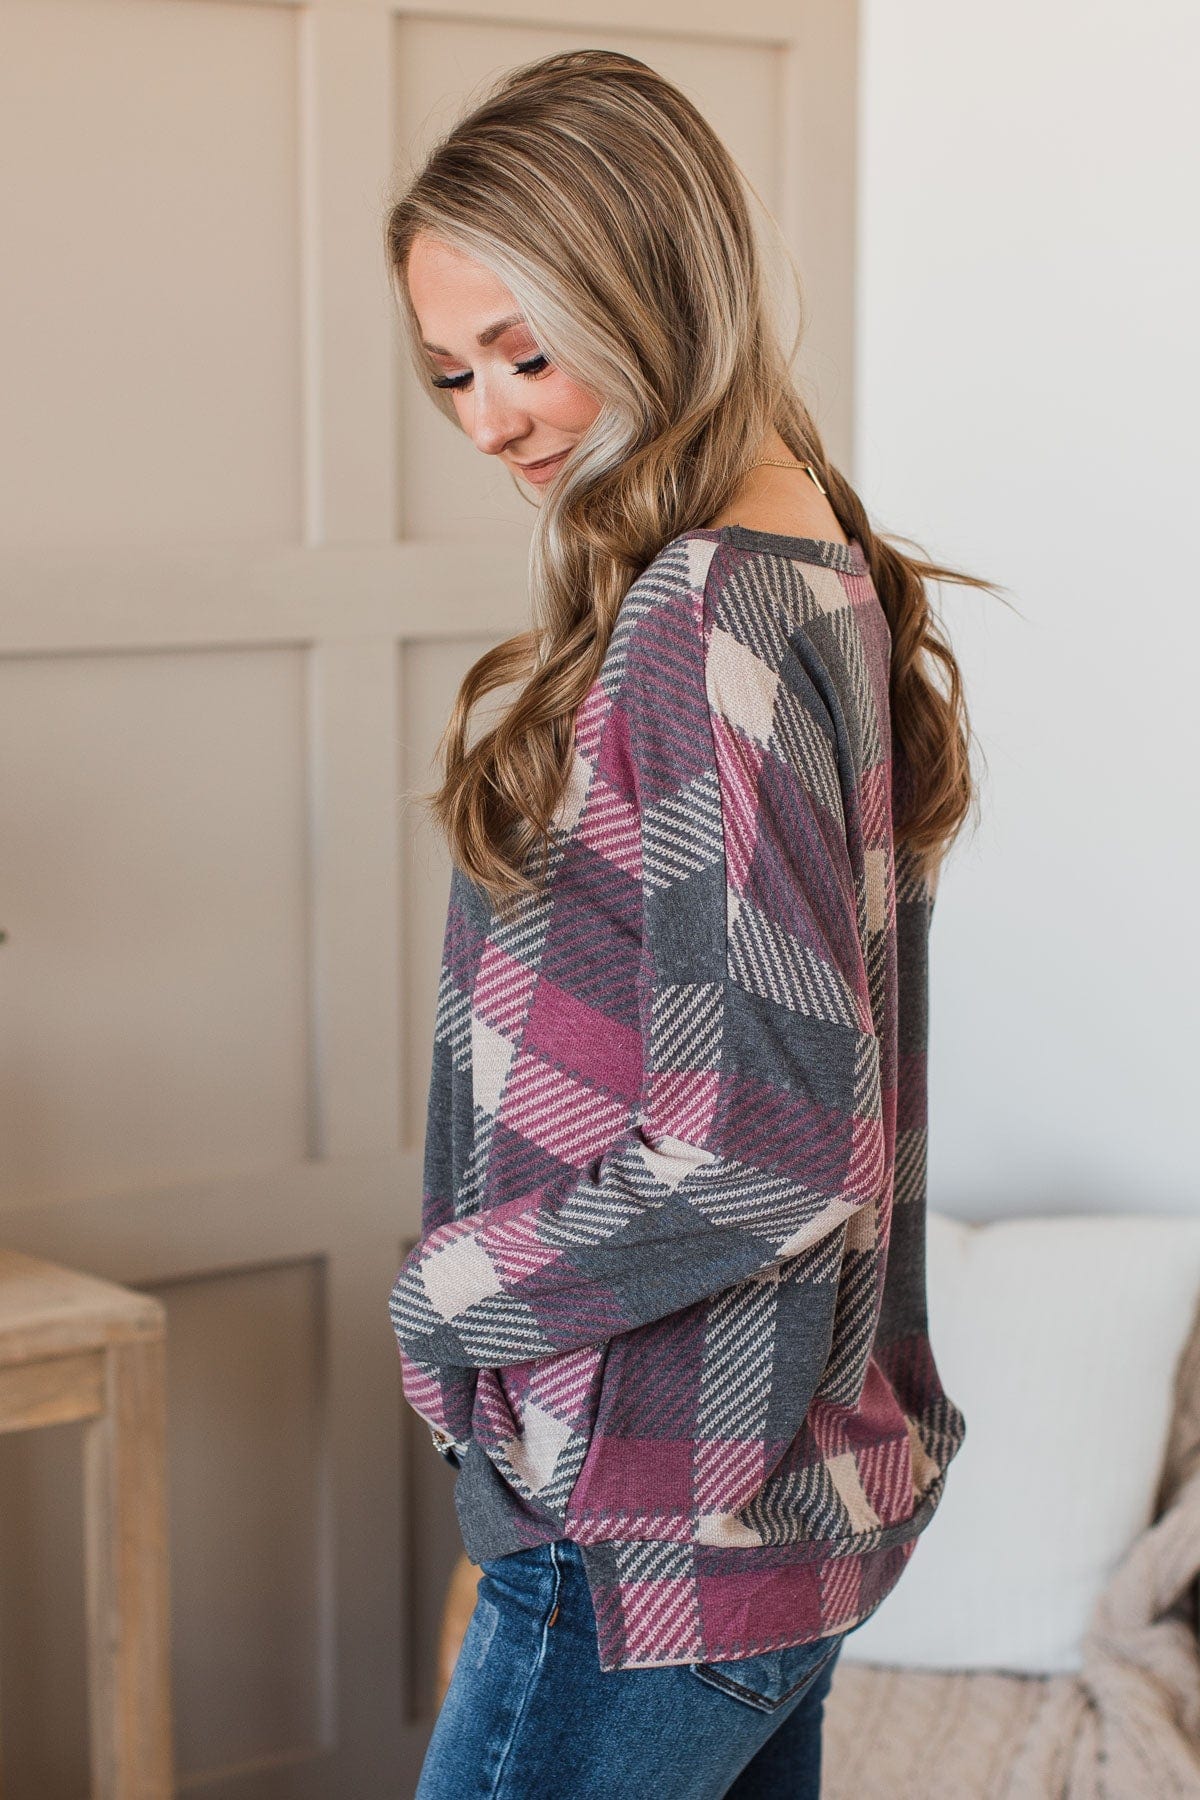 Caught By Surprise Plaid Knit Top- Charcoal